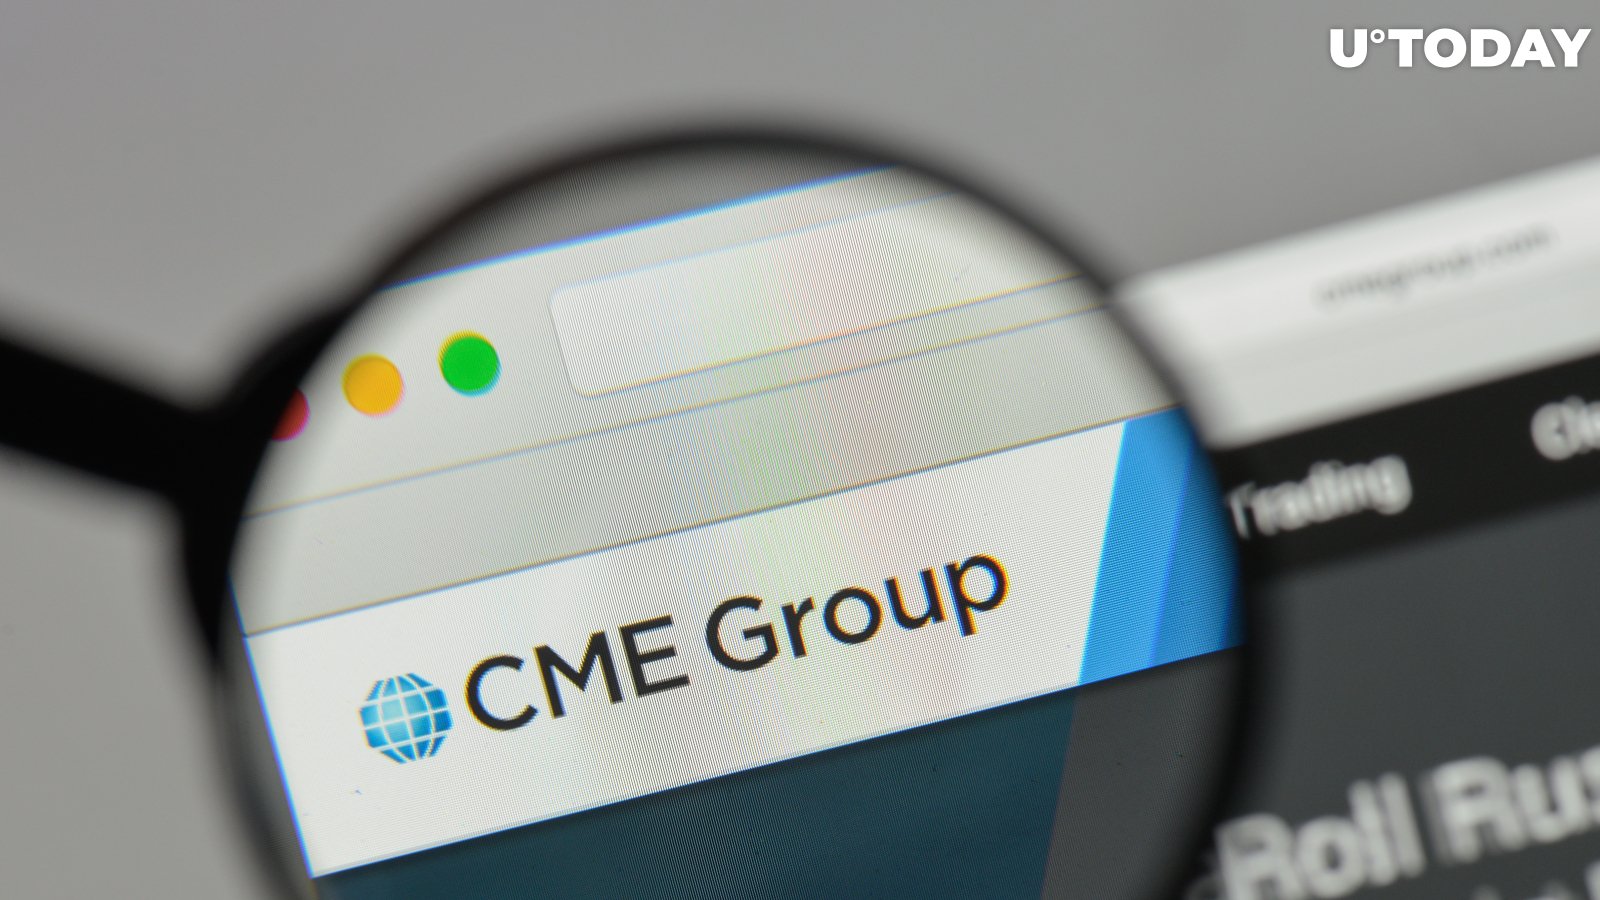 CME's Bitcoin Futures and Options Had Record-Breaking Q2